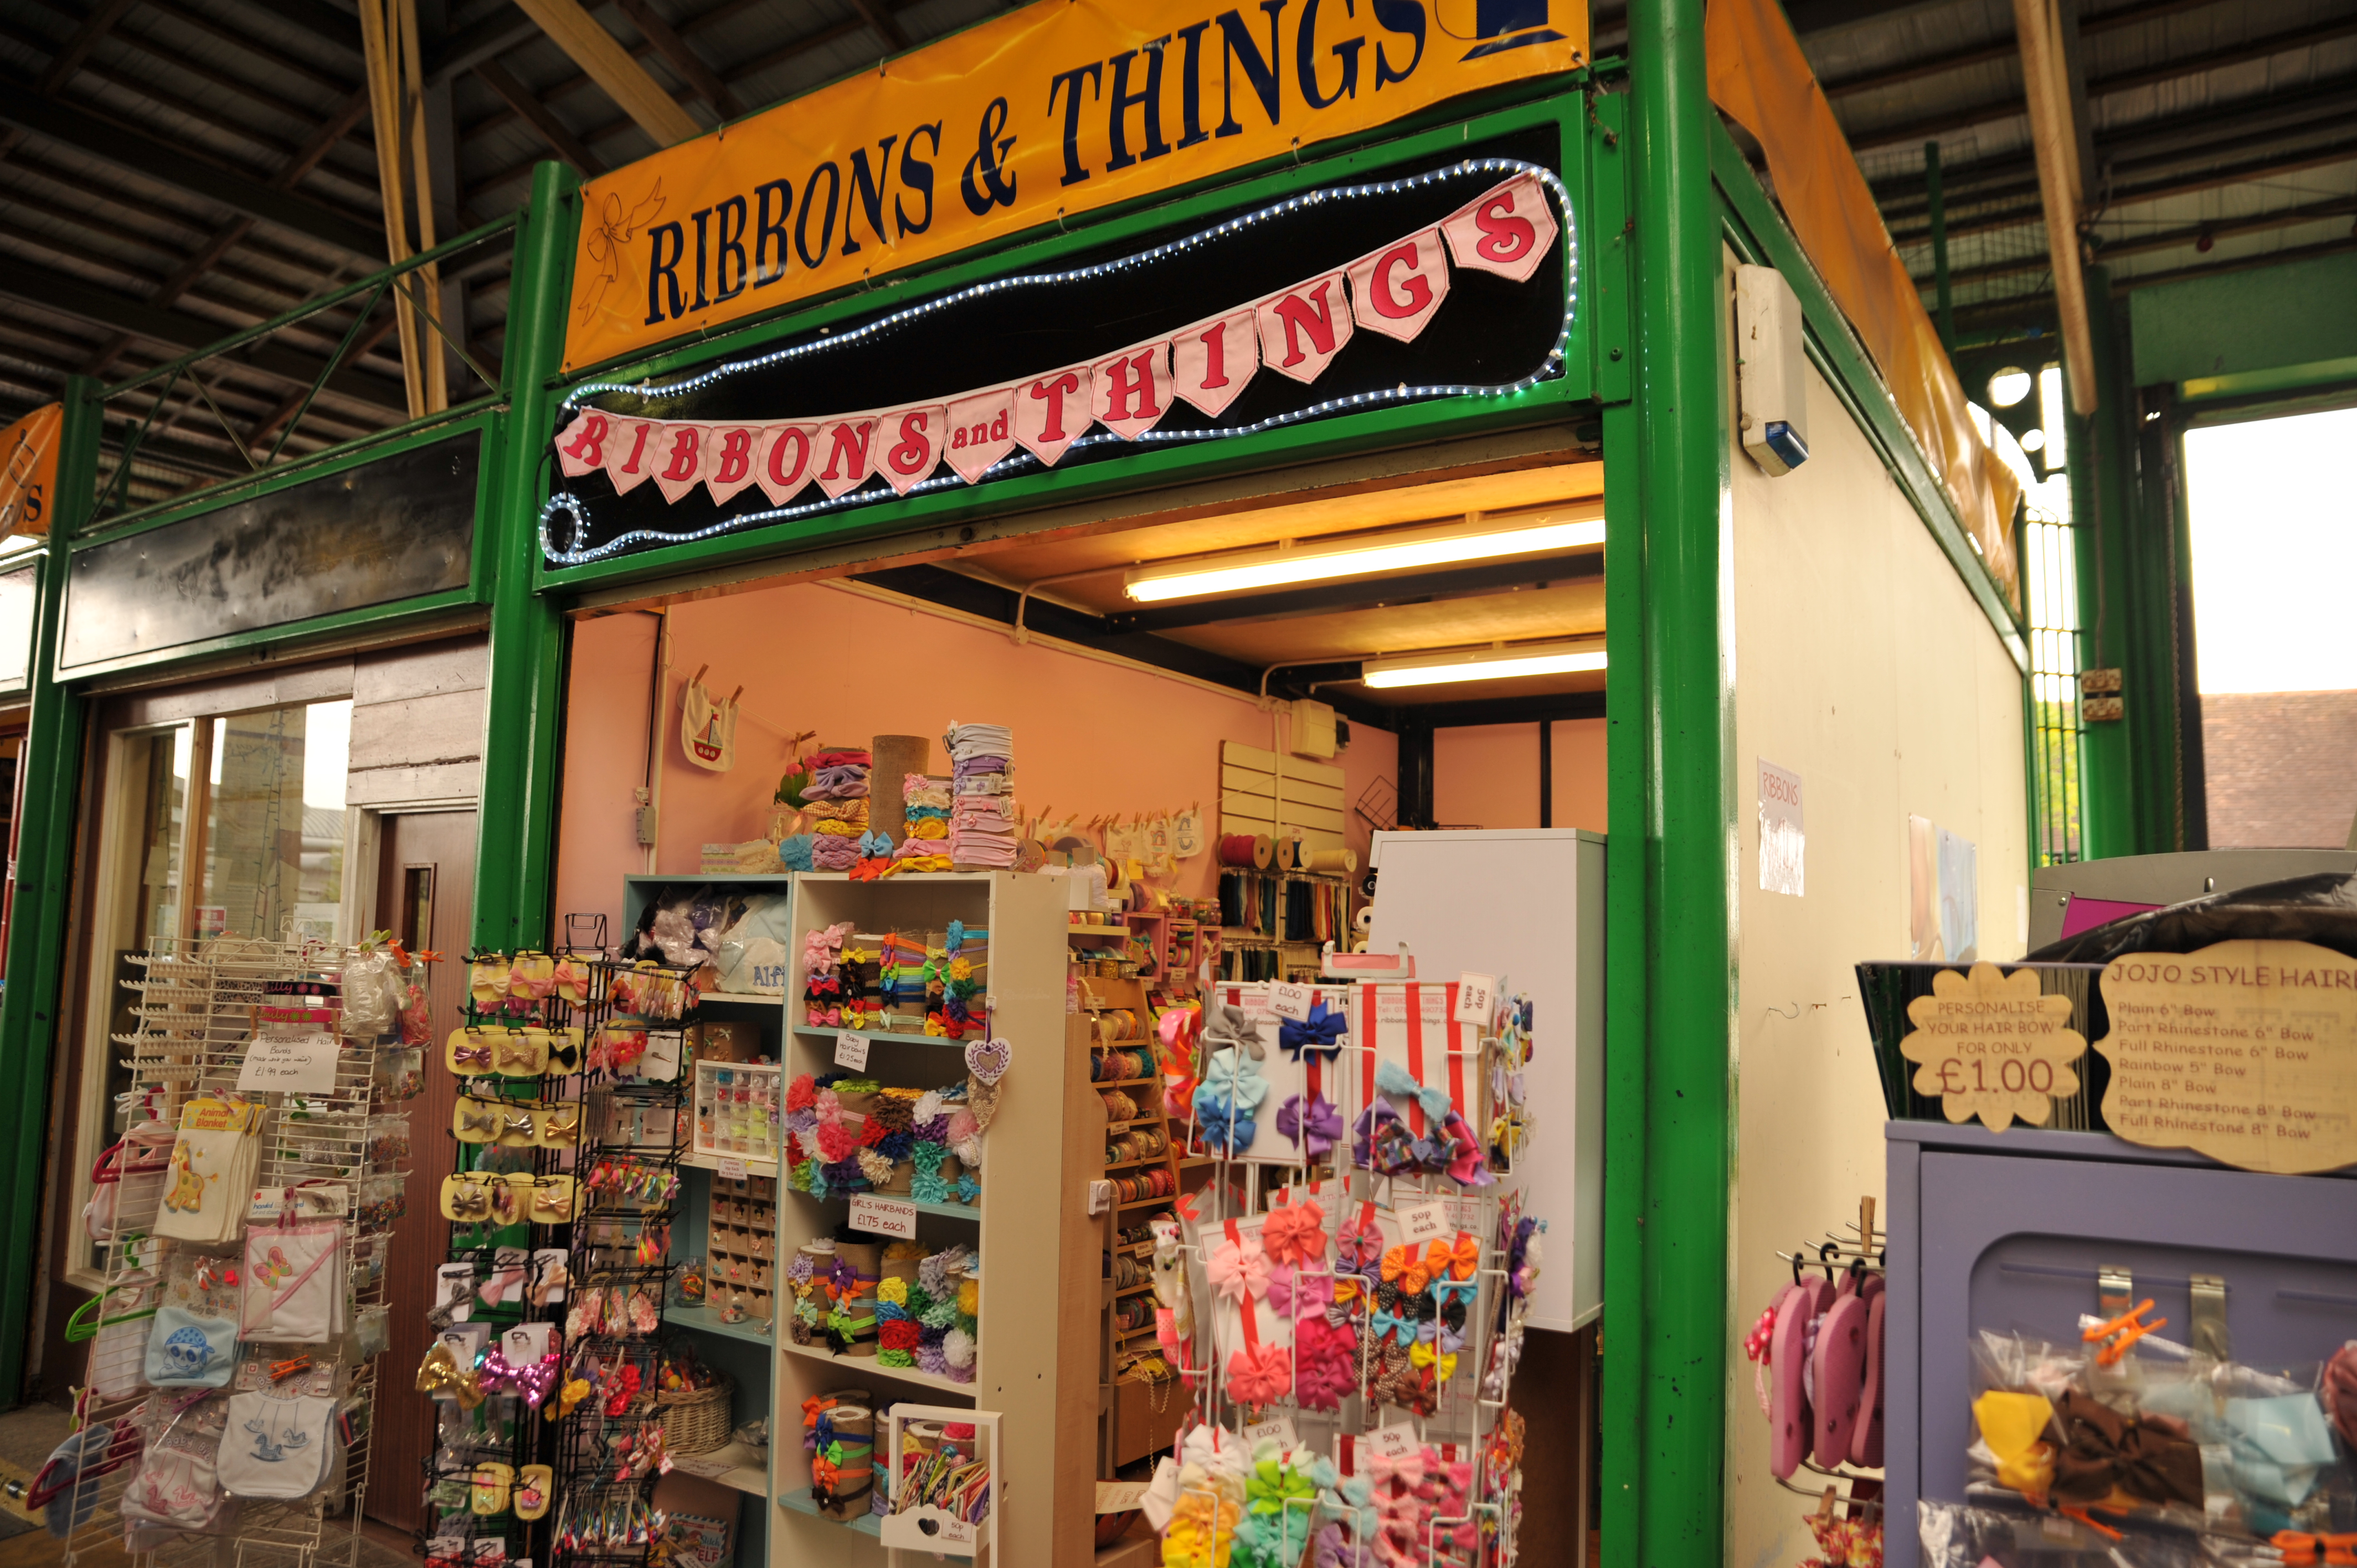 Ribbons-&-Things-Bedworth-Market